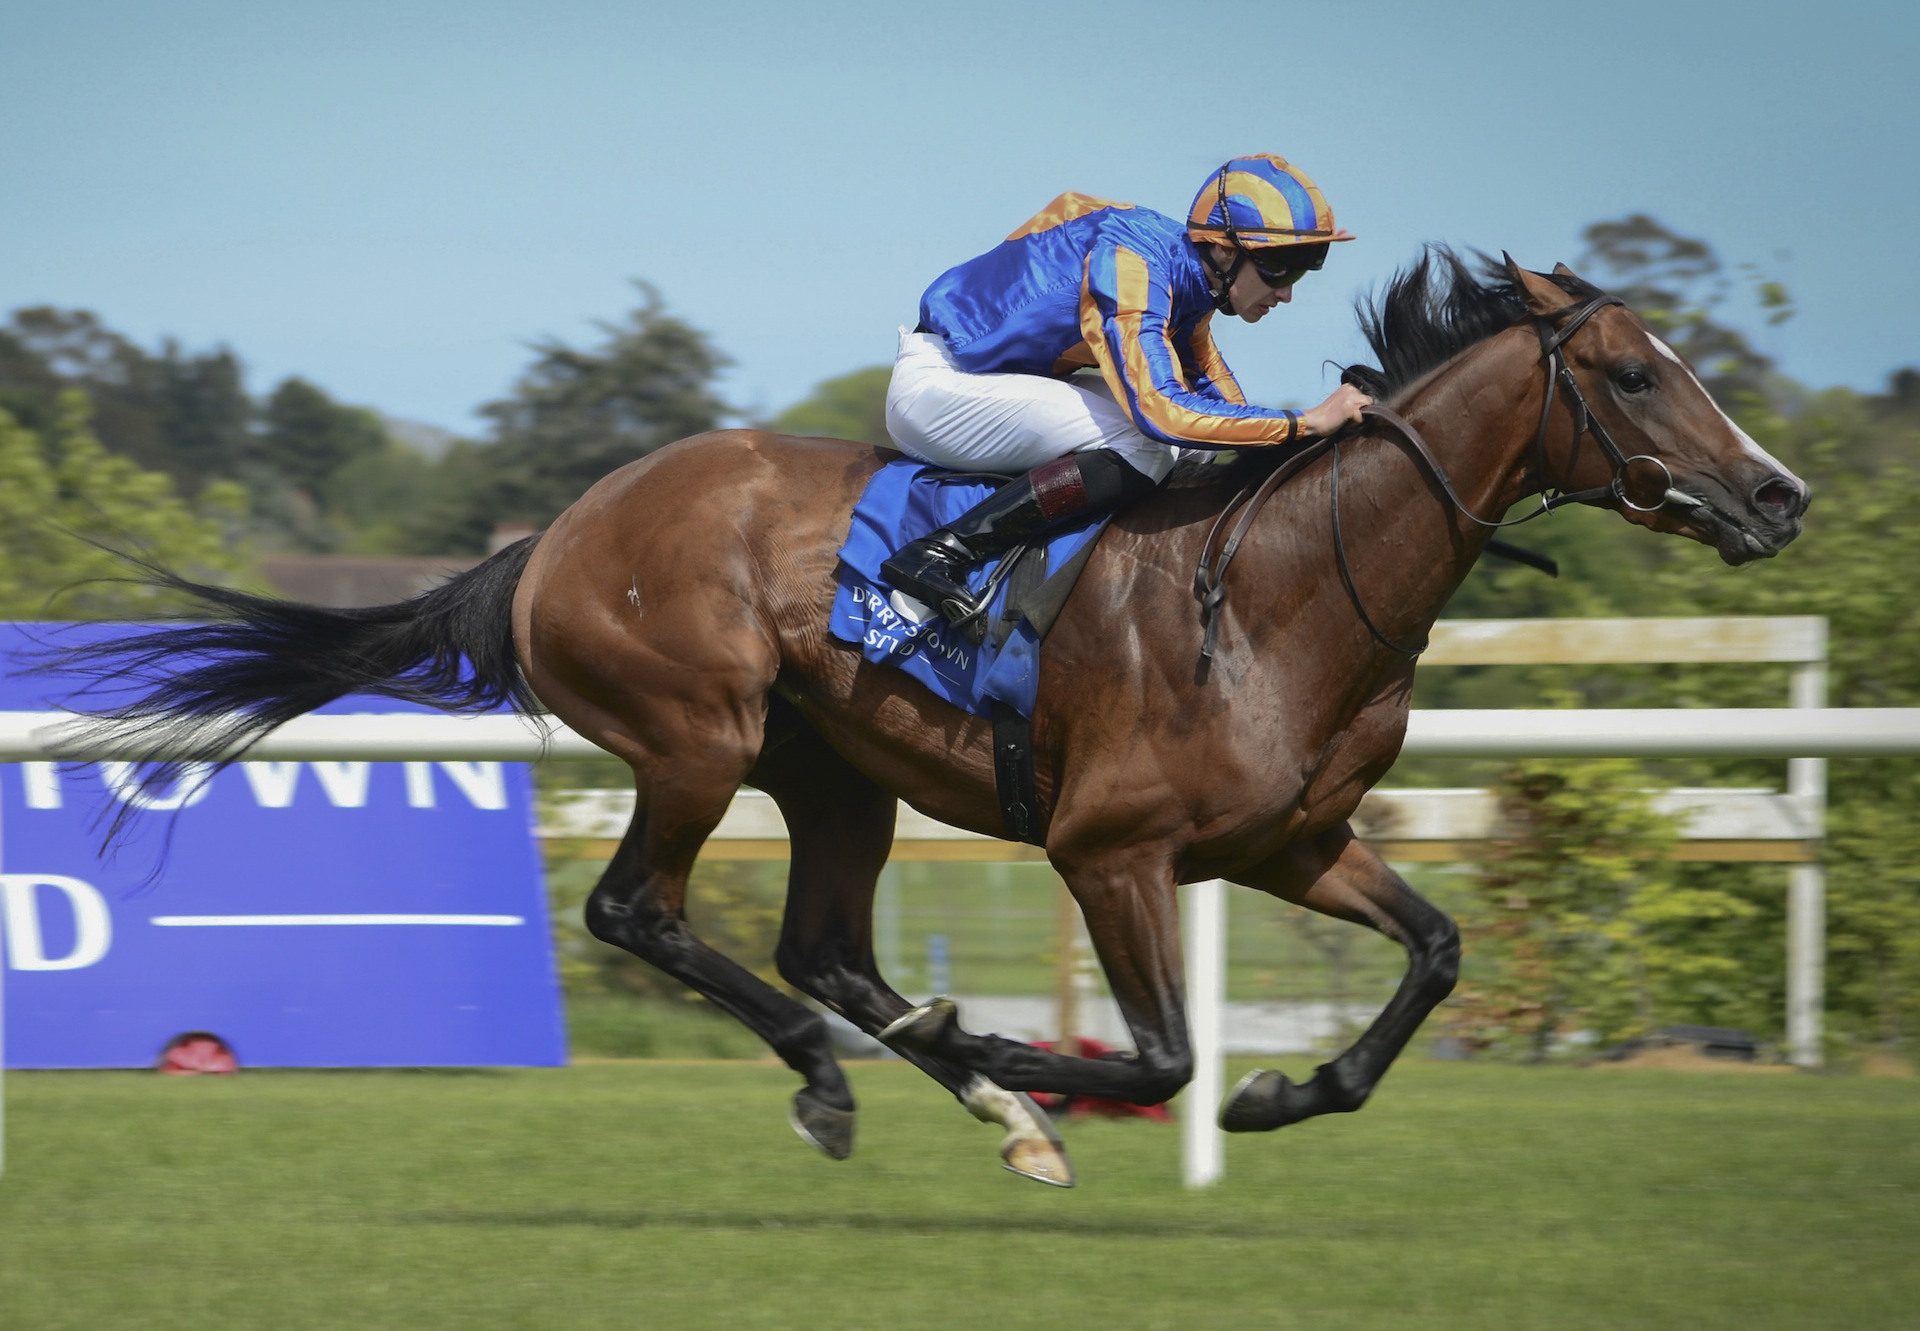 Broome (Australia) Wins The Group 3 Derby Trial At Leopardstown